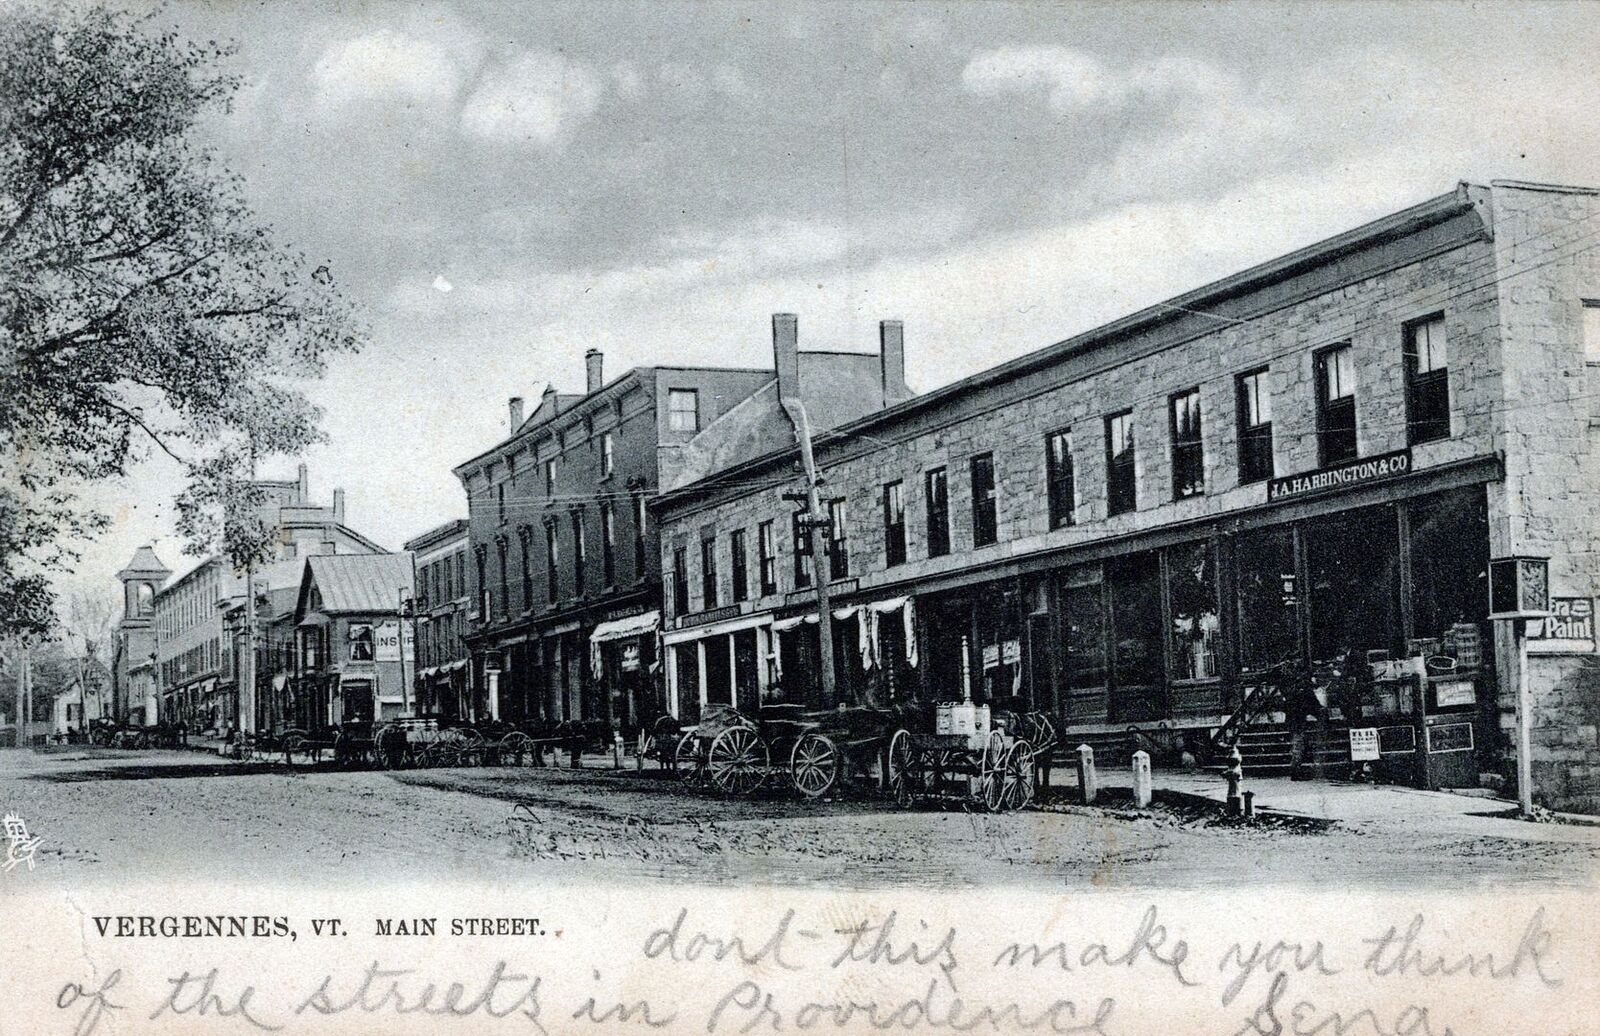 VERGENNES VT - Main Street Showing Parked Carriages Tuck Postcard - udb - 1907